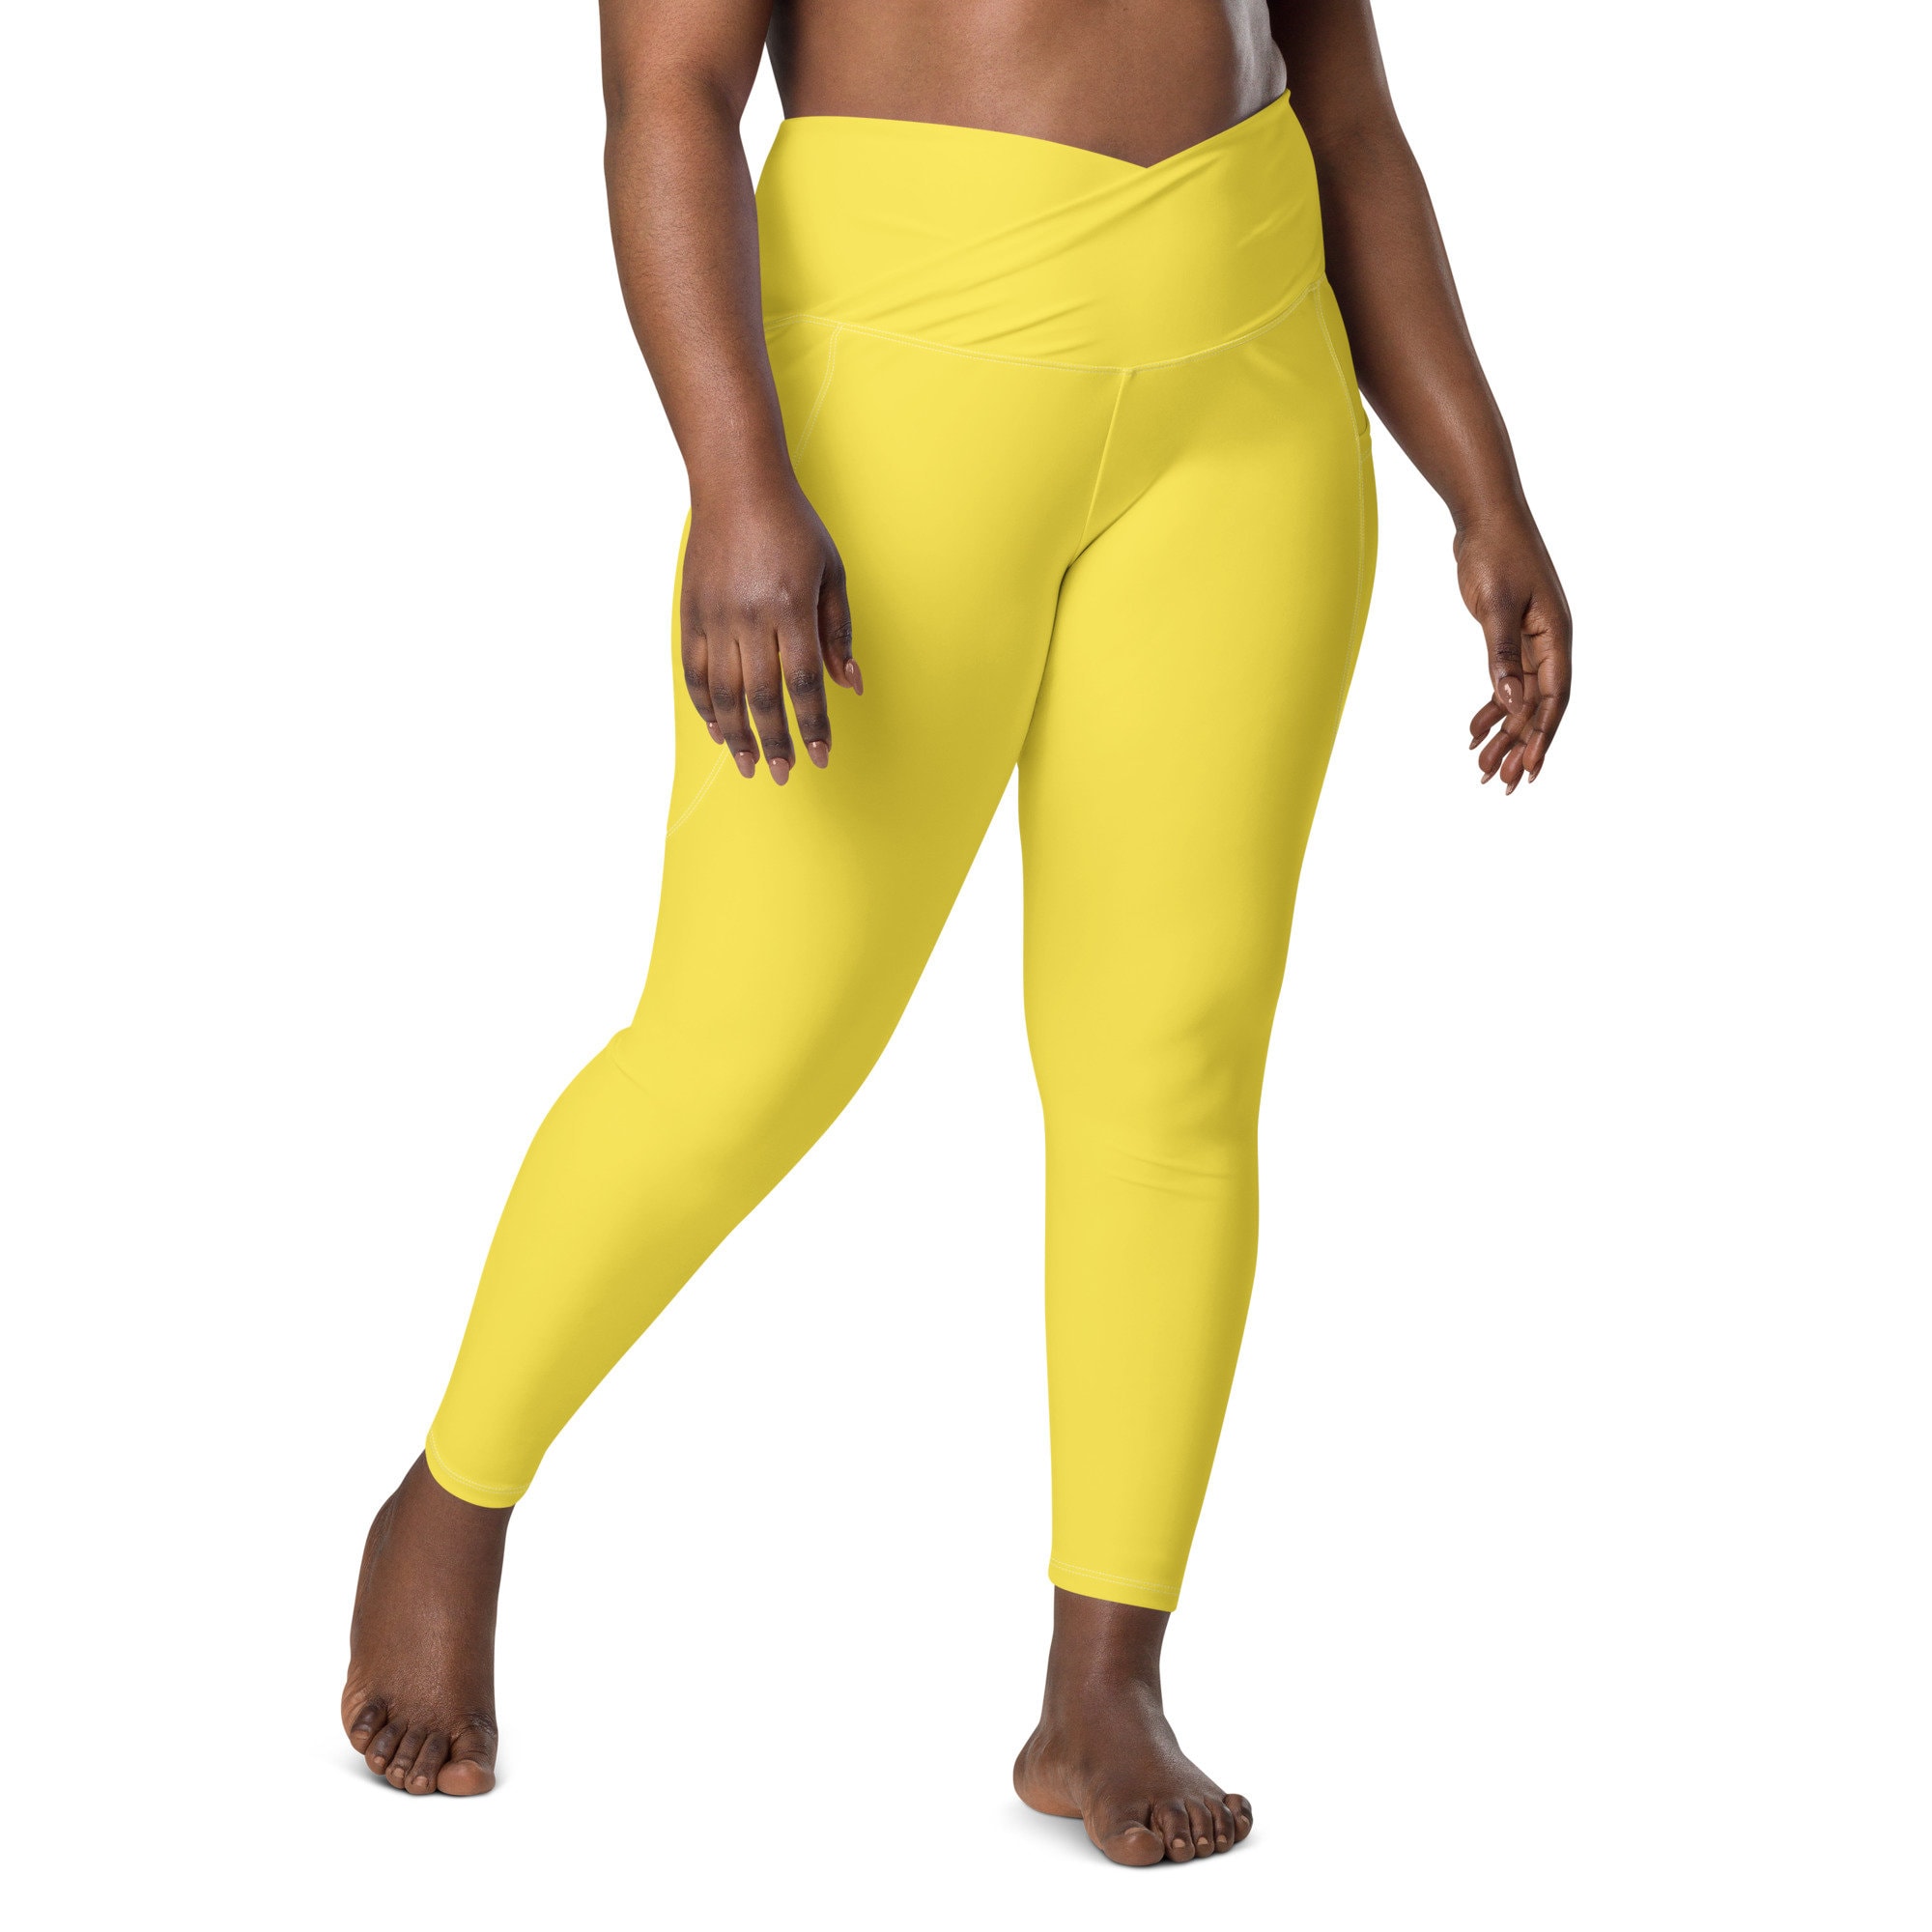 Solid Yellow Leggings for Women, Plain Yellow Leggings,high Waisted  Crossover Leggings With Pocket, Plus Size Printed Leggings,workout Pants -   Israel